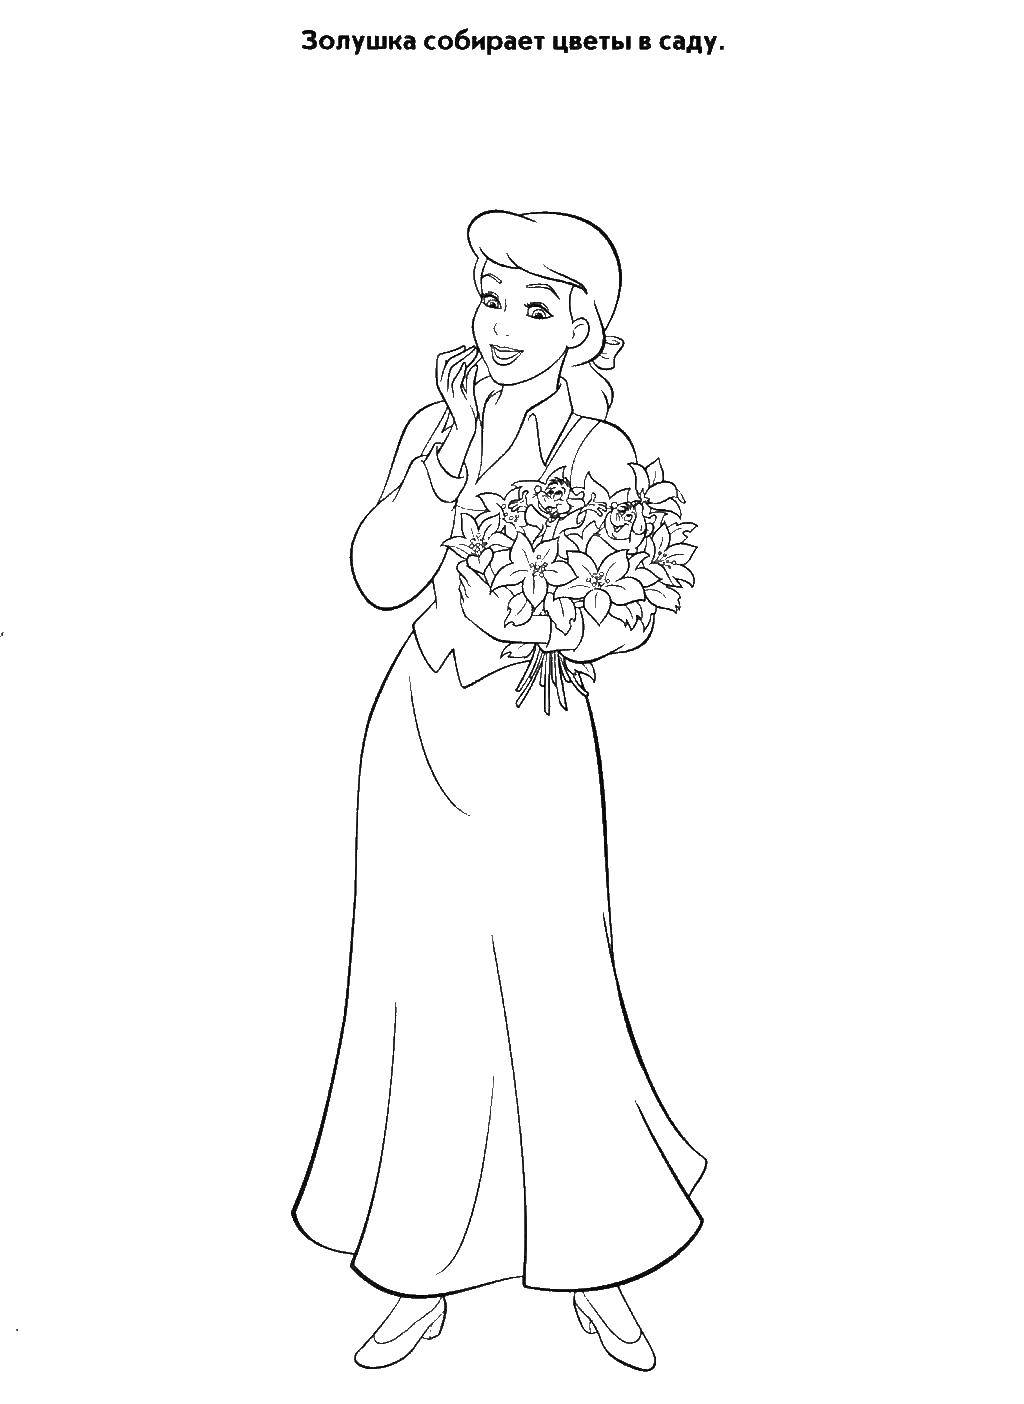 Coloring Cinderella with flowers. Category Cinderella. Tags:  Cinderella, flowers.